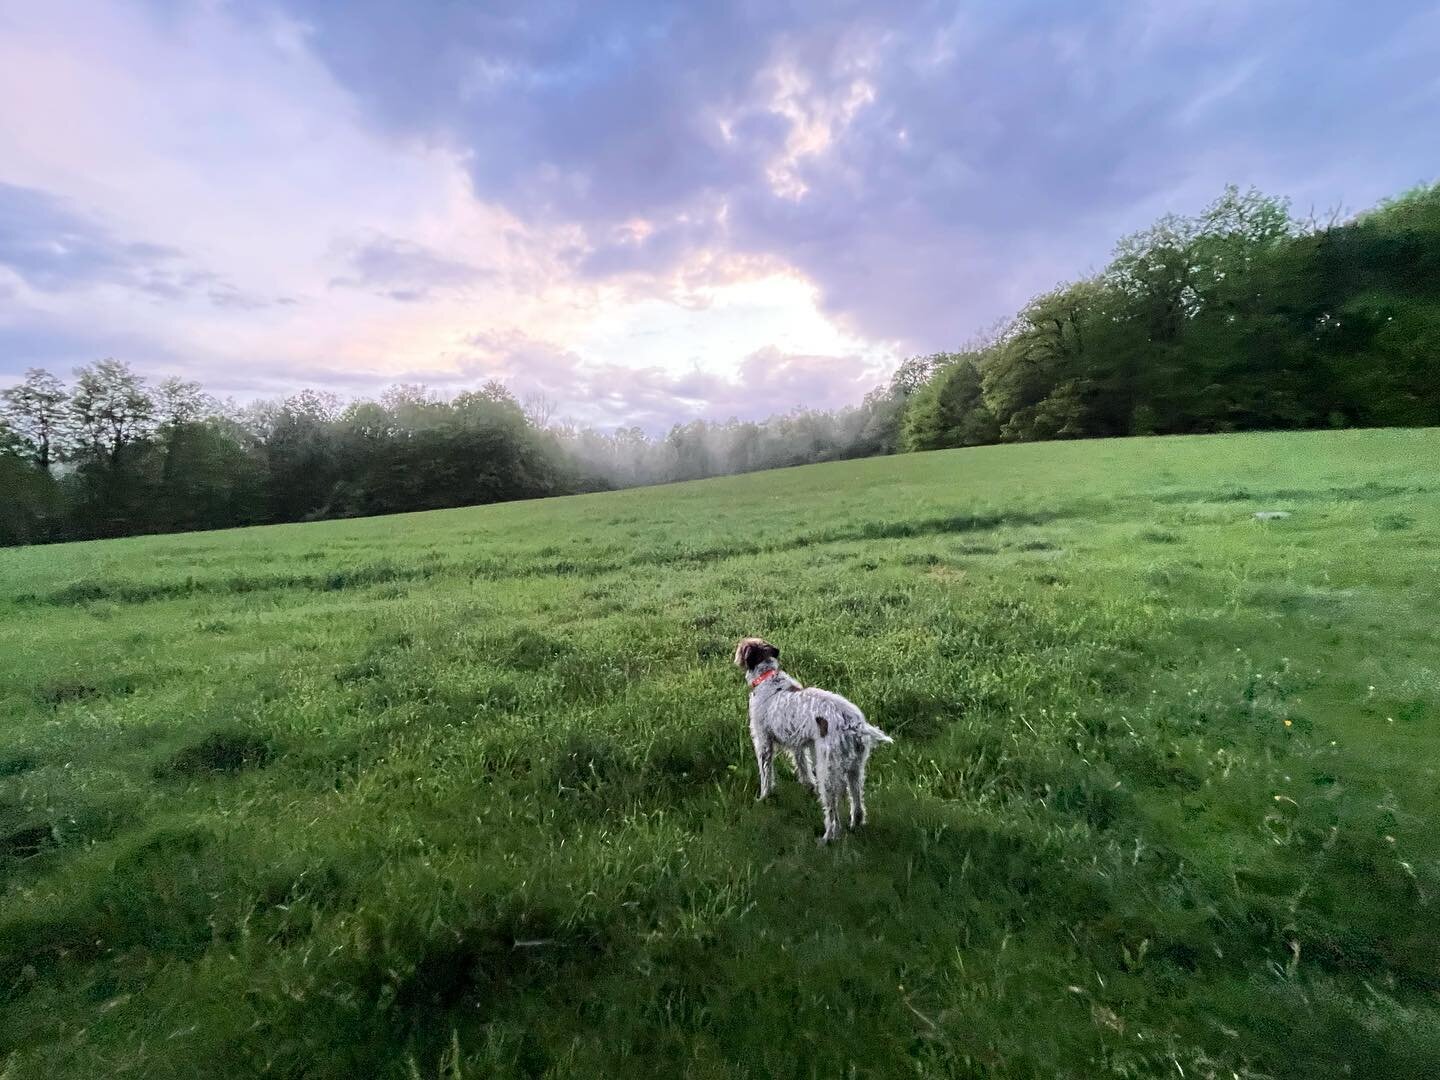 On magnificent evenings like this, after a torrential rainfall and the sun returns, when a mist forms above the fields, amongst all the glory of nature, Hugo and I ask ourselves, should we pick up golf? 

#nature #farmlife #connecticut #newenglandliv